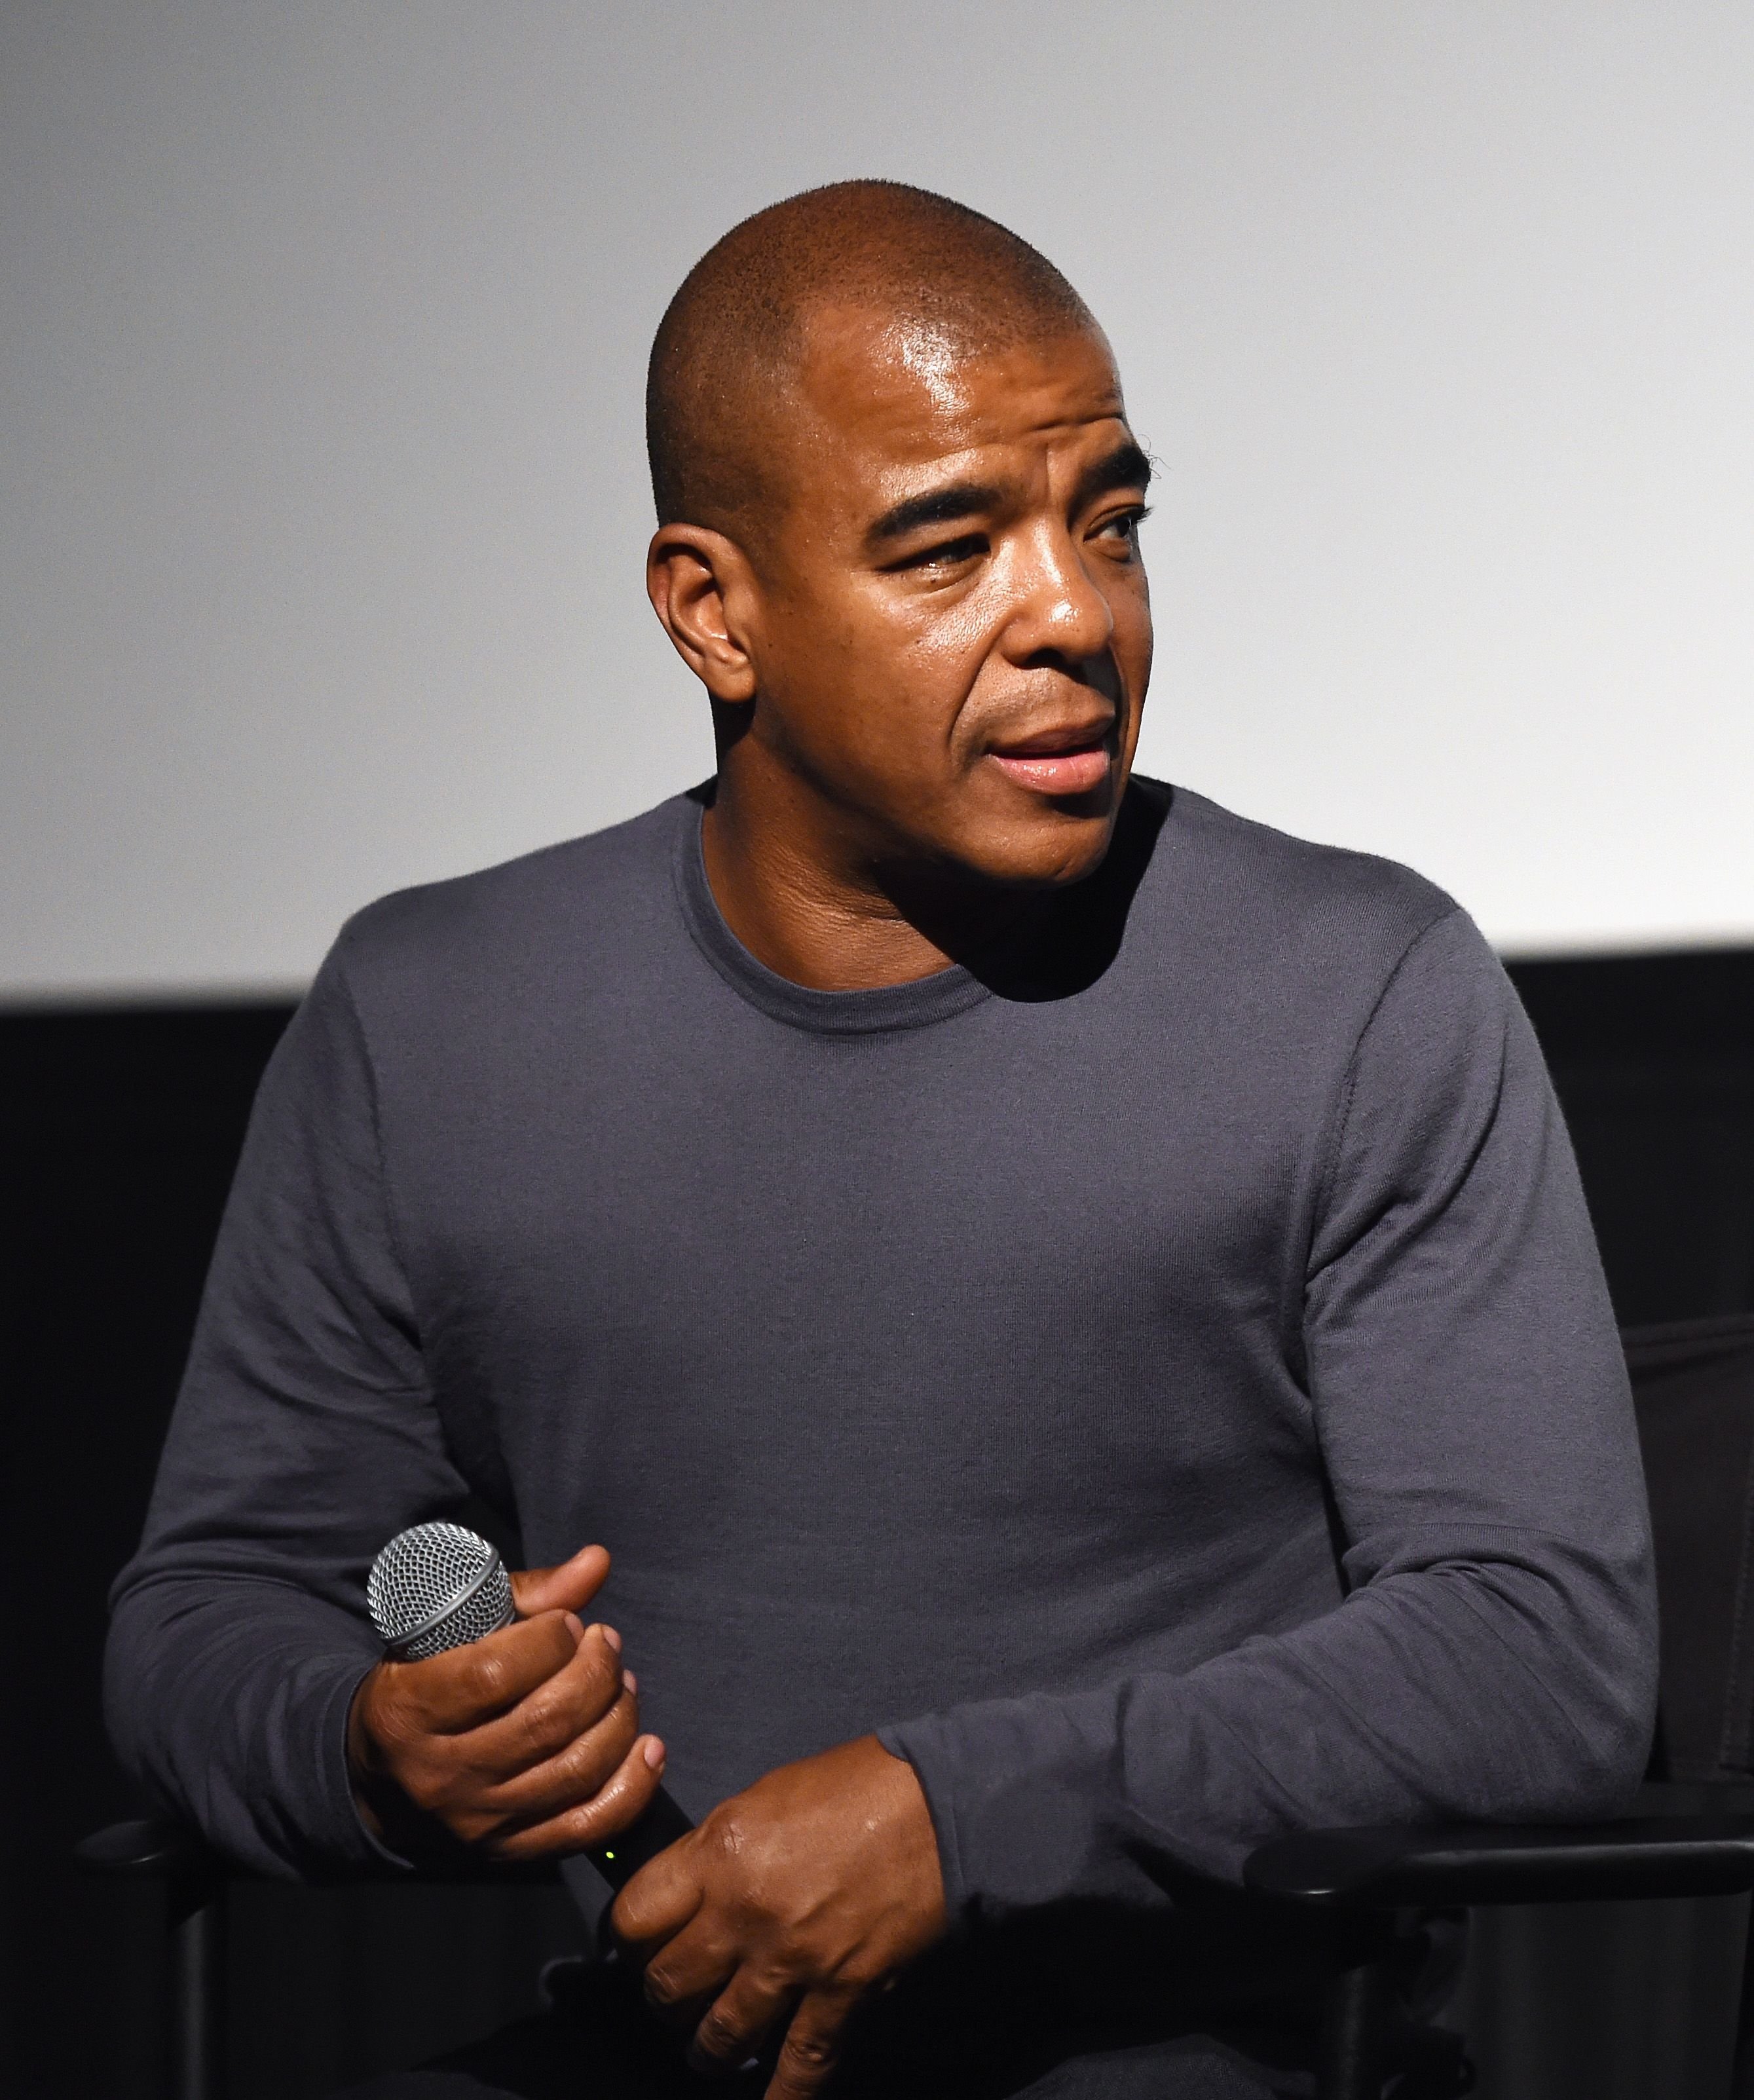 Erick Morillo at the 2017 Los Angeles Film Festival screening of "What We Started" at the ArcLight Santa Monica on June 15, 2017 in Santa Monica, California. | Source: Getty Images